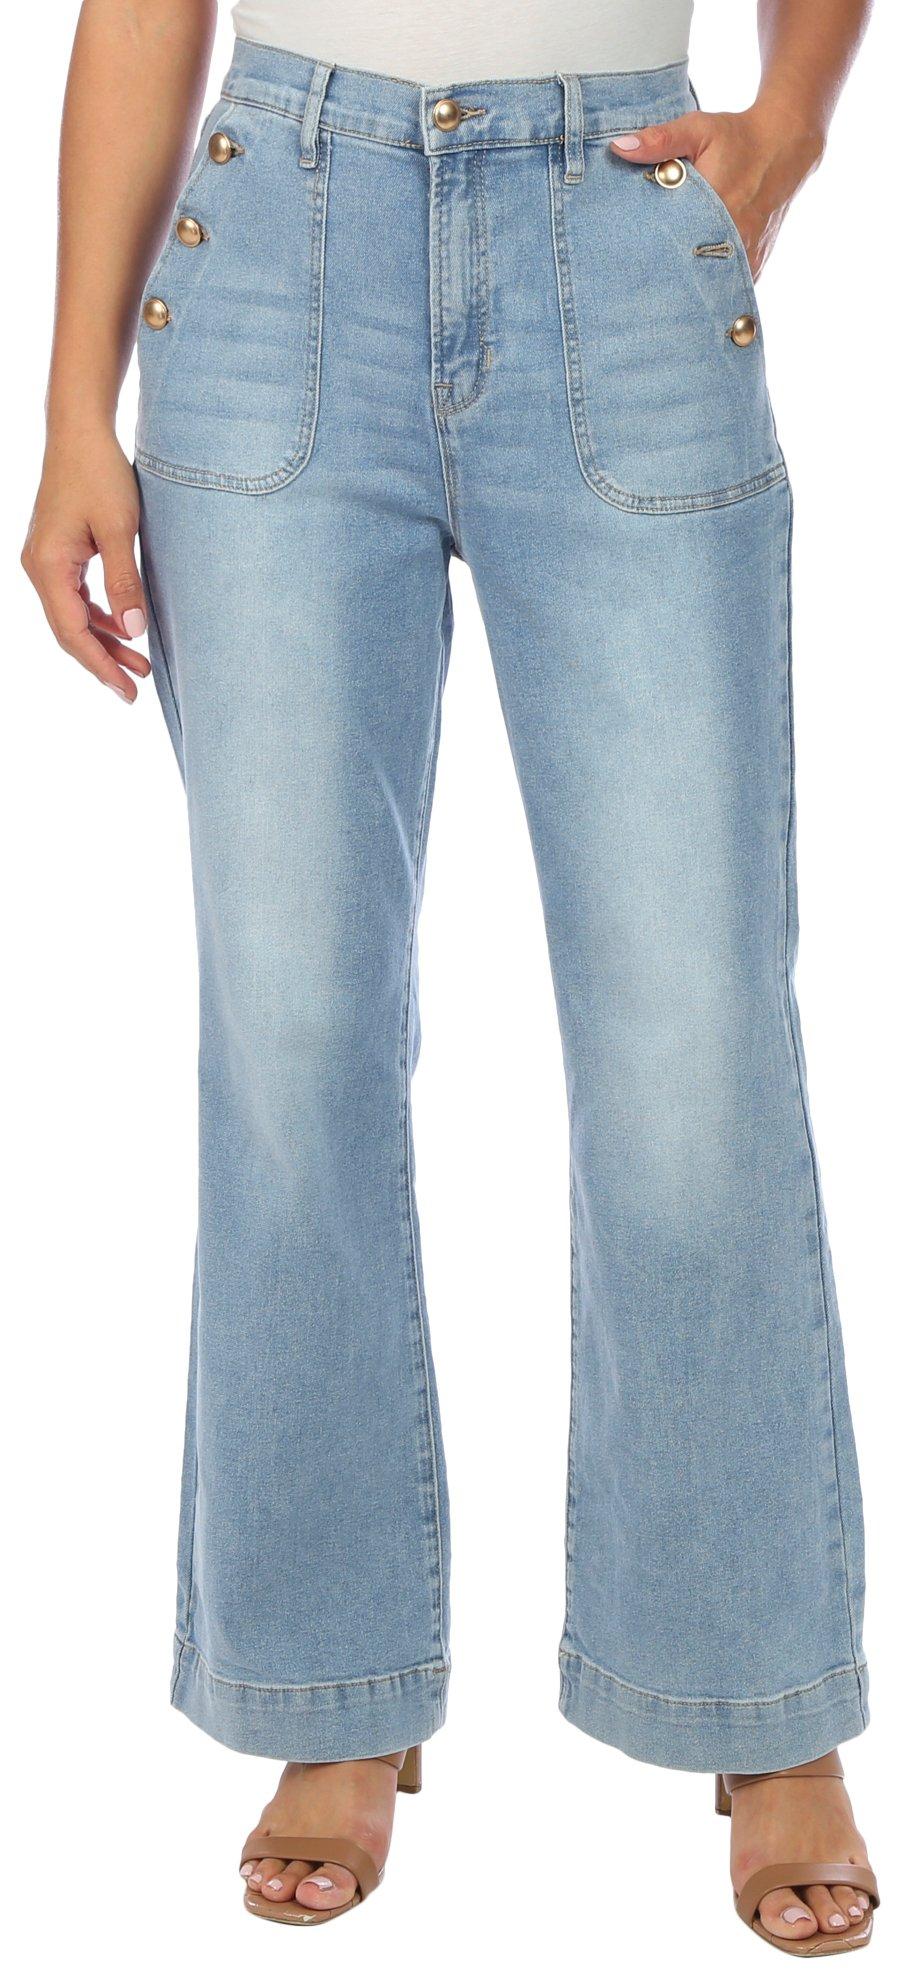 Womens Perf Fry Boot Cut Jeans